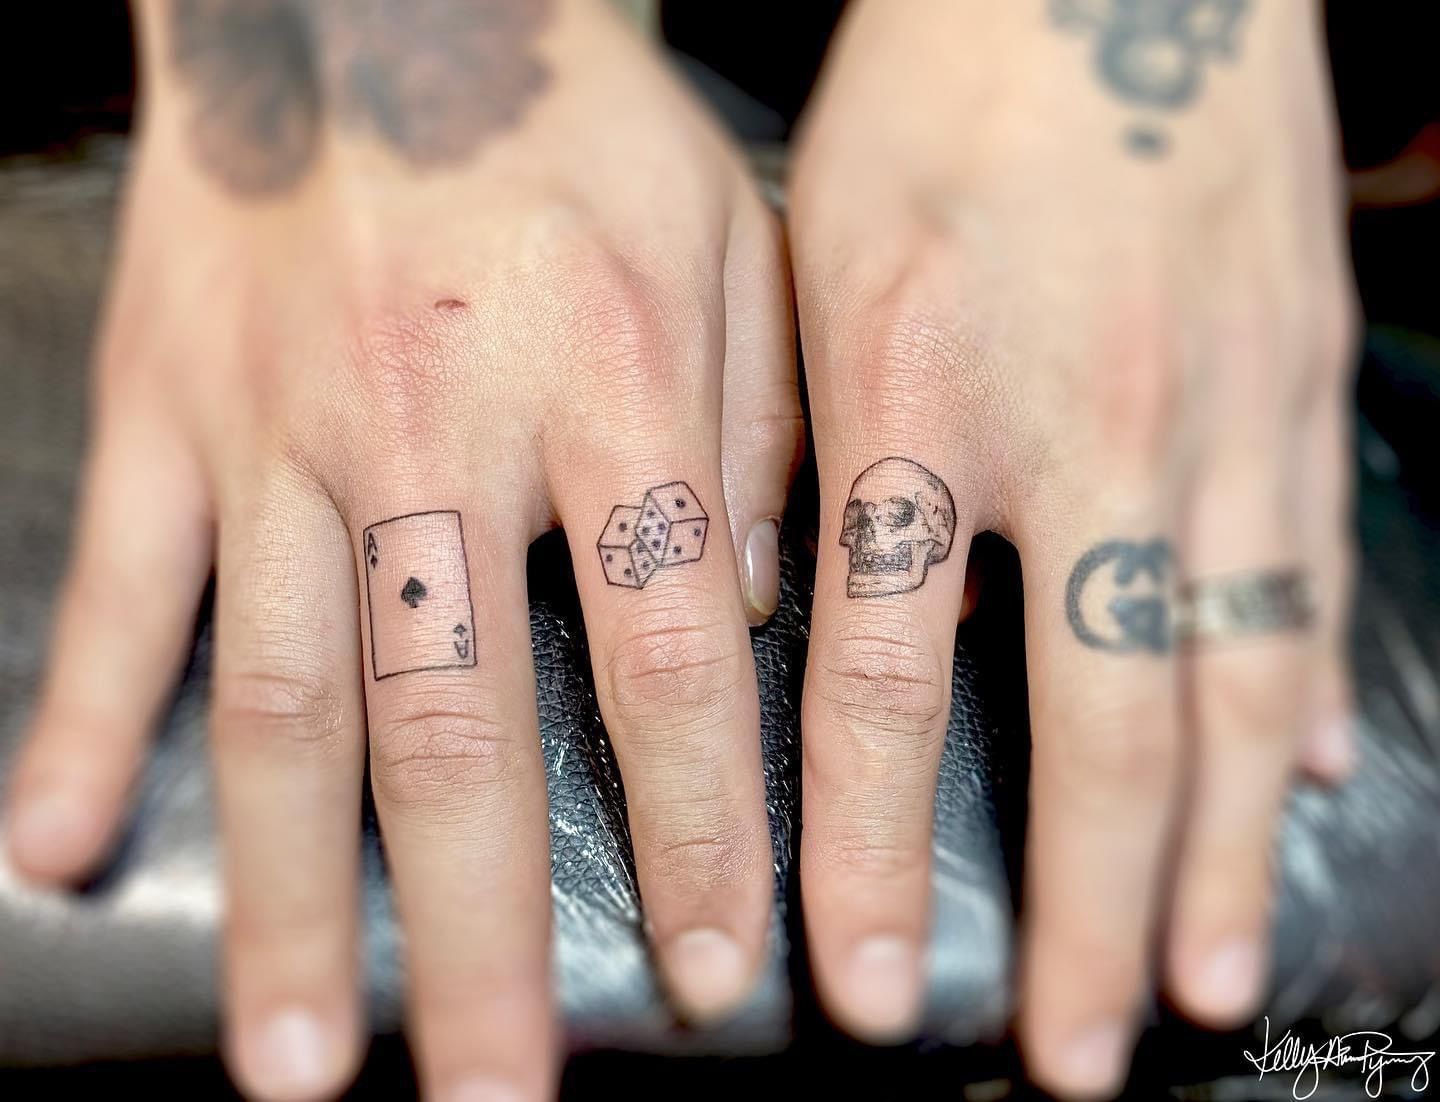 Skull finger tattoo ♥ | Skull finger tattoos, Tattoos for guys, Cool tattoos